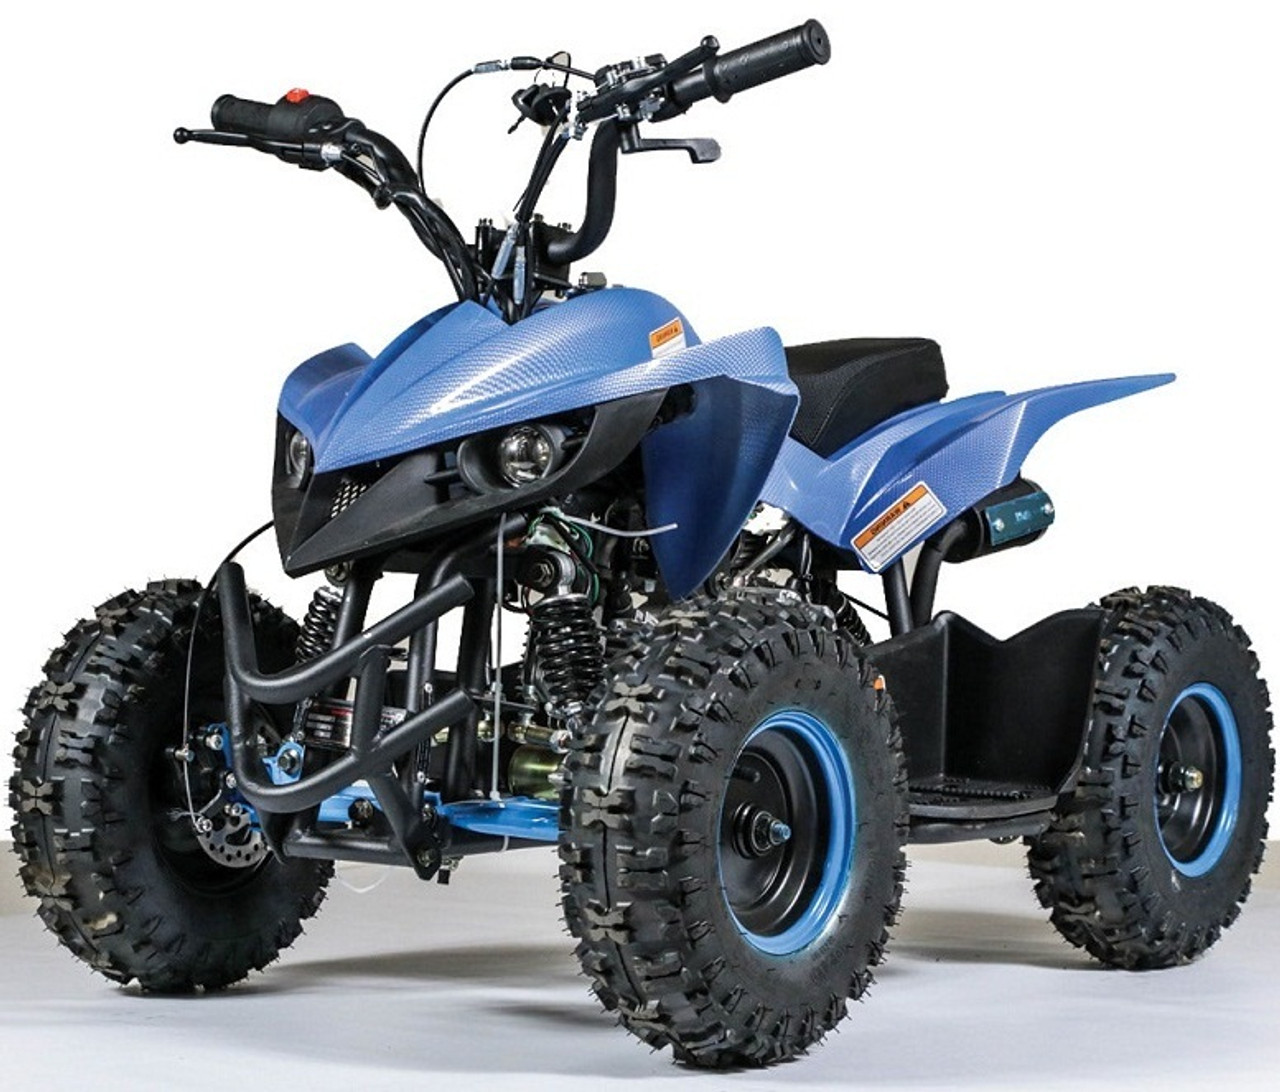 Who Can Ride ATVs and What are the Safety Guidelines one Should Follow